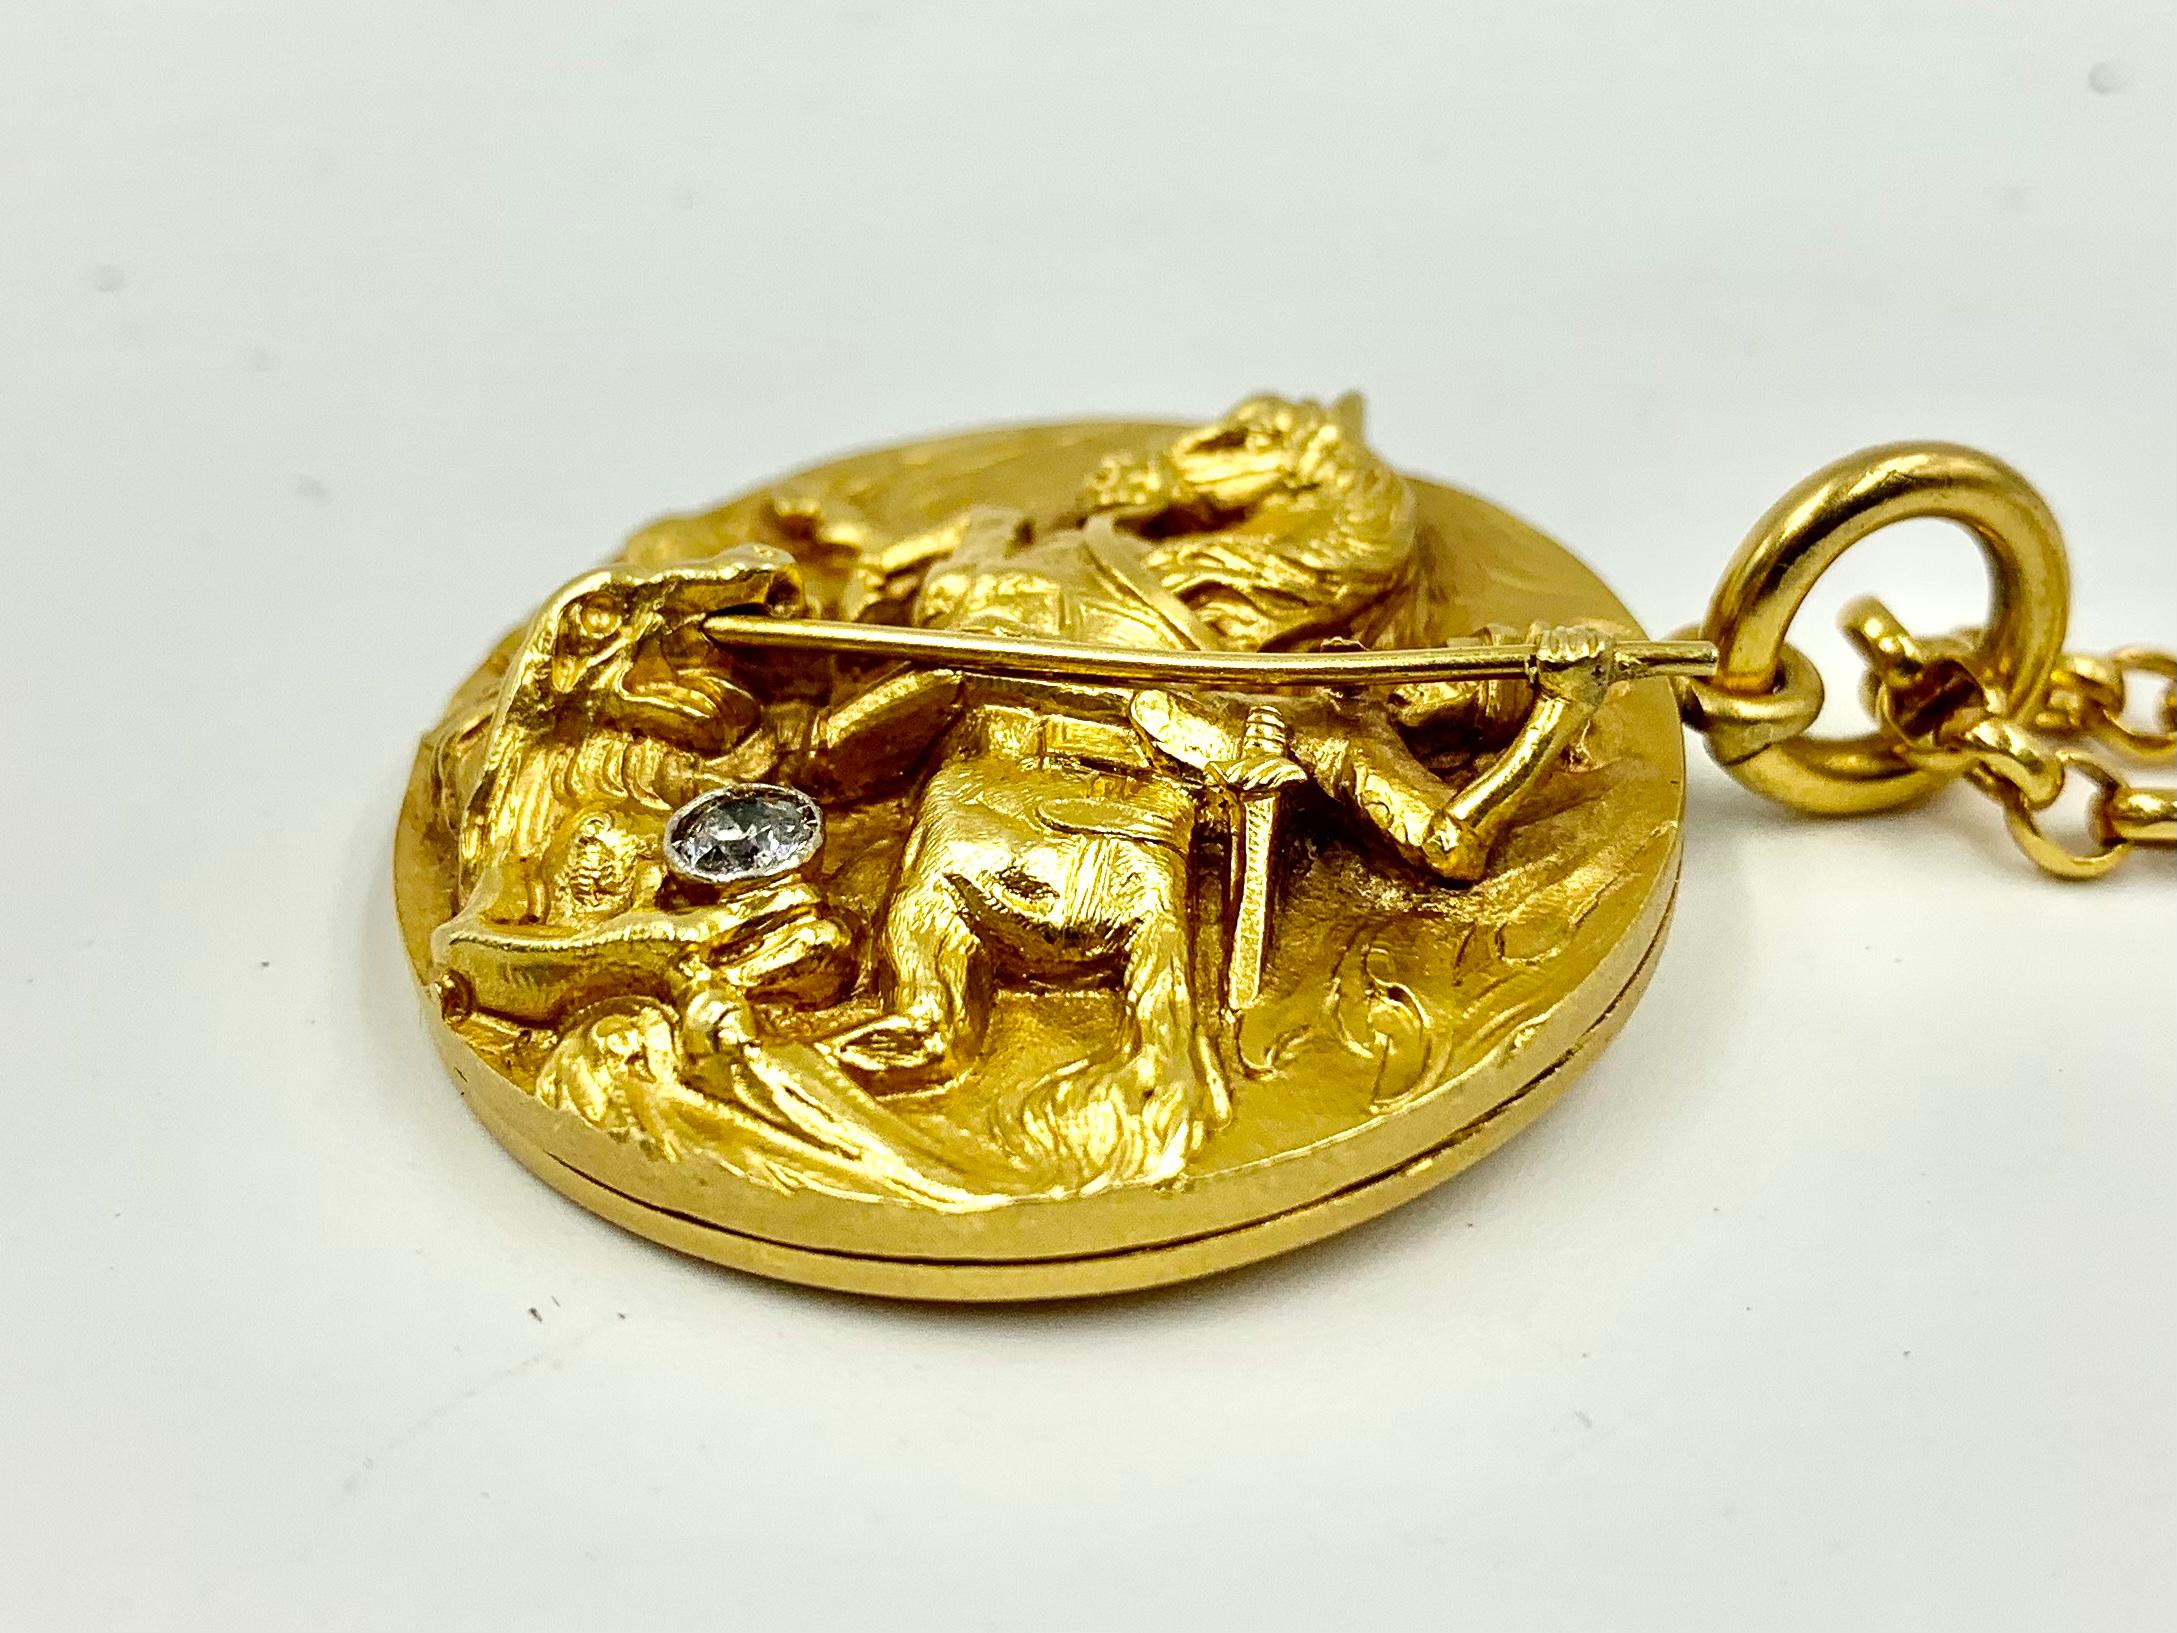 Modernist Large Saint George and the Dragon 18K Gold, Diamond High Relief Locket on Chain